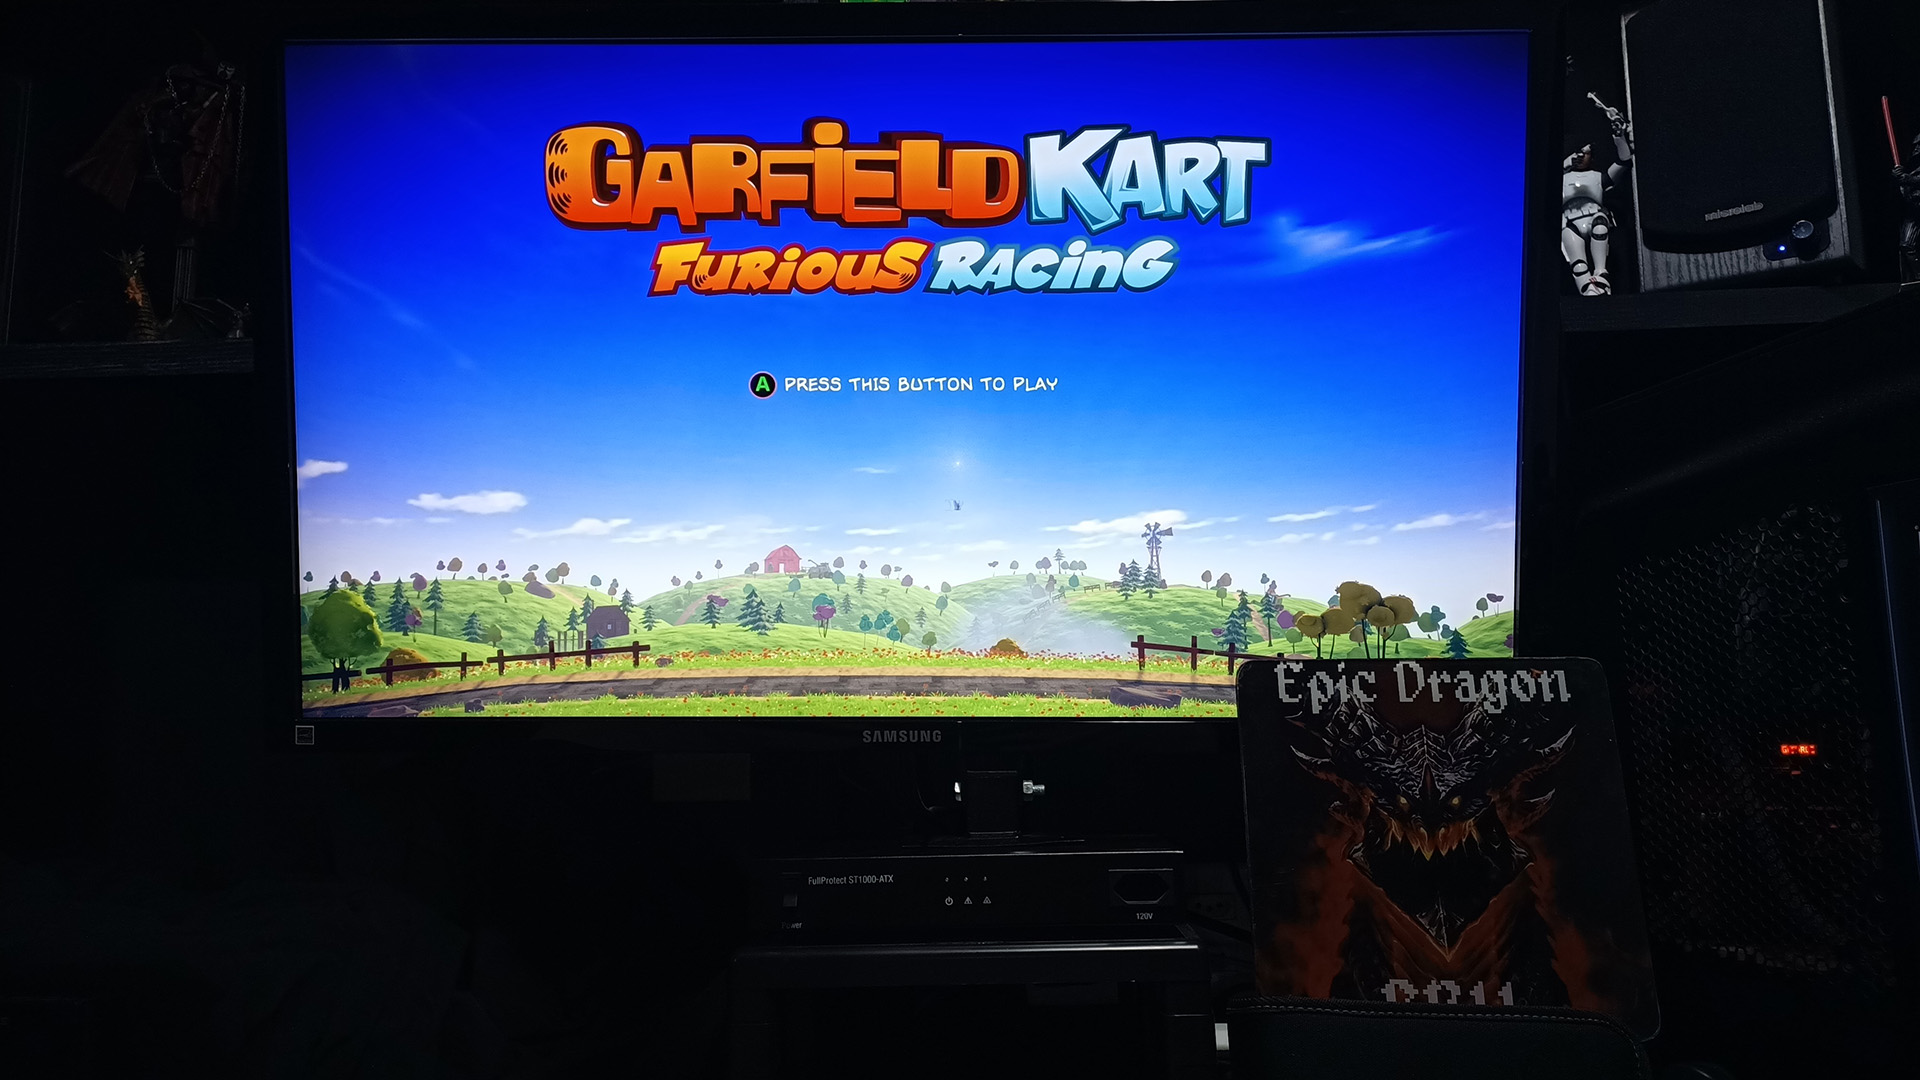 EpicDragon: Garfield Kart Furious Racing: Play Misty For Me [Time Trial: Lap Time] (PC) 0:00:43.086 points on 2022-08-11 17:18:39